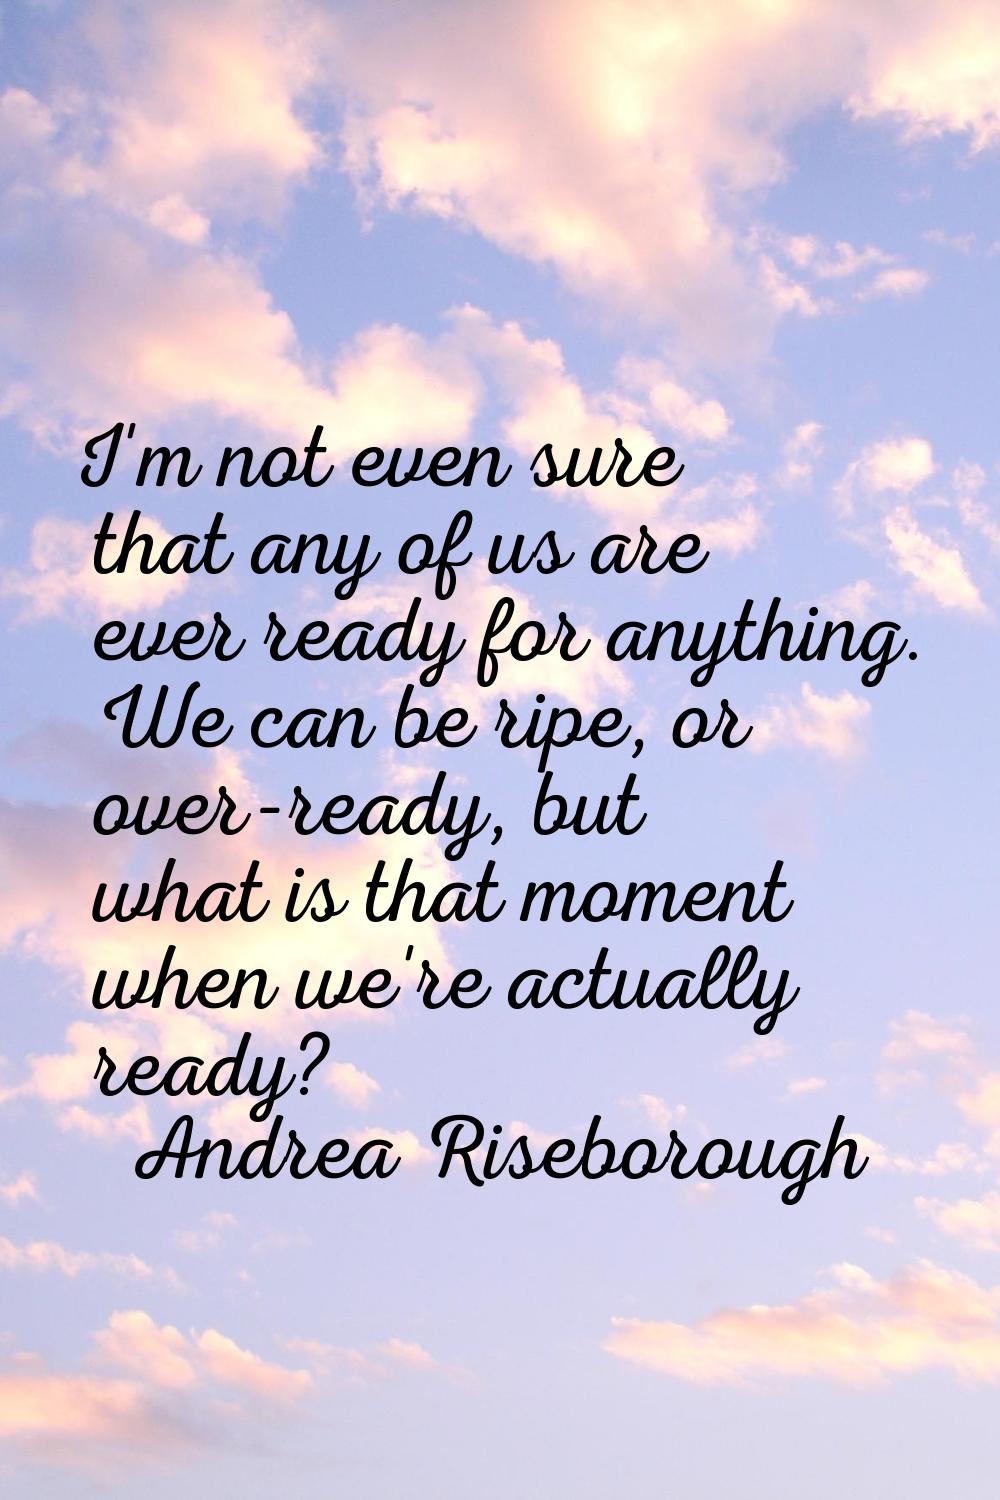 I'm not even sure that any of us are ever ready for anything. We can be ripe, or over-ready, but wh